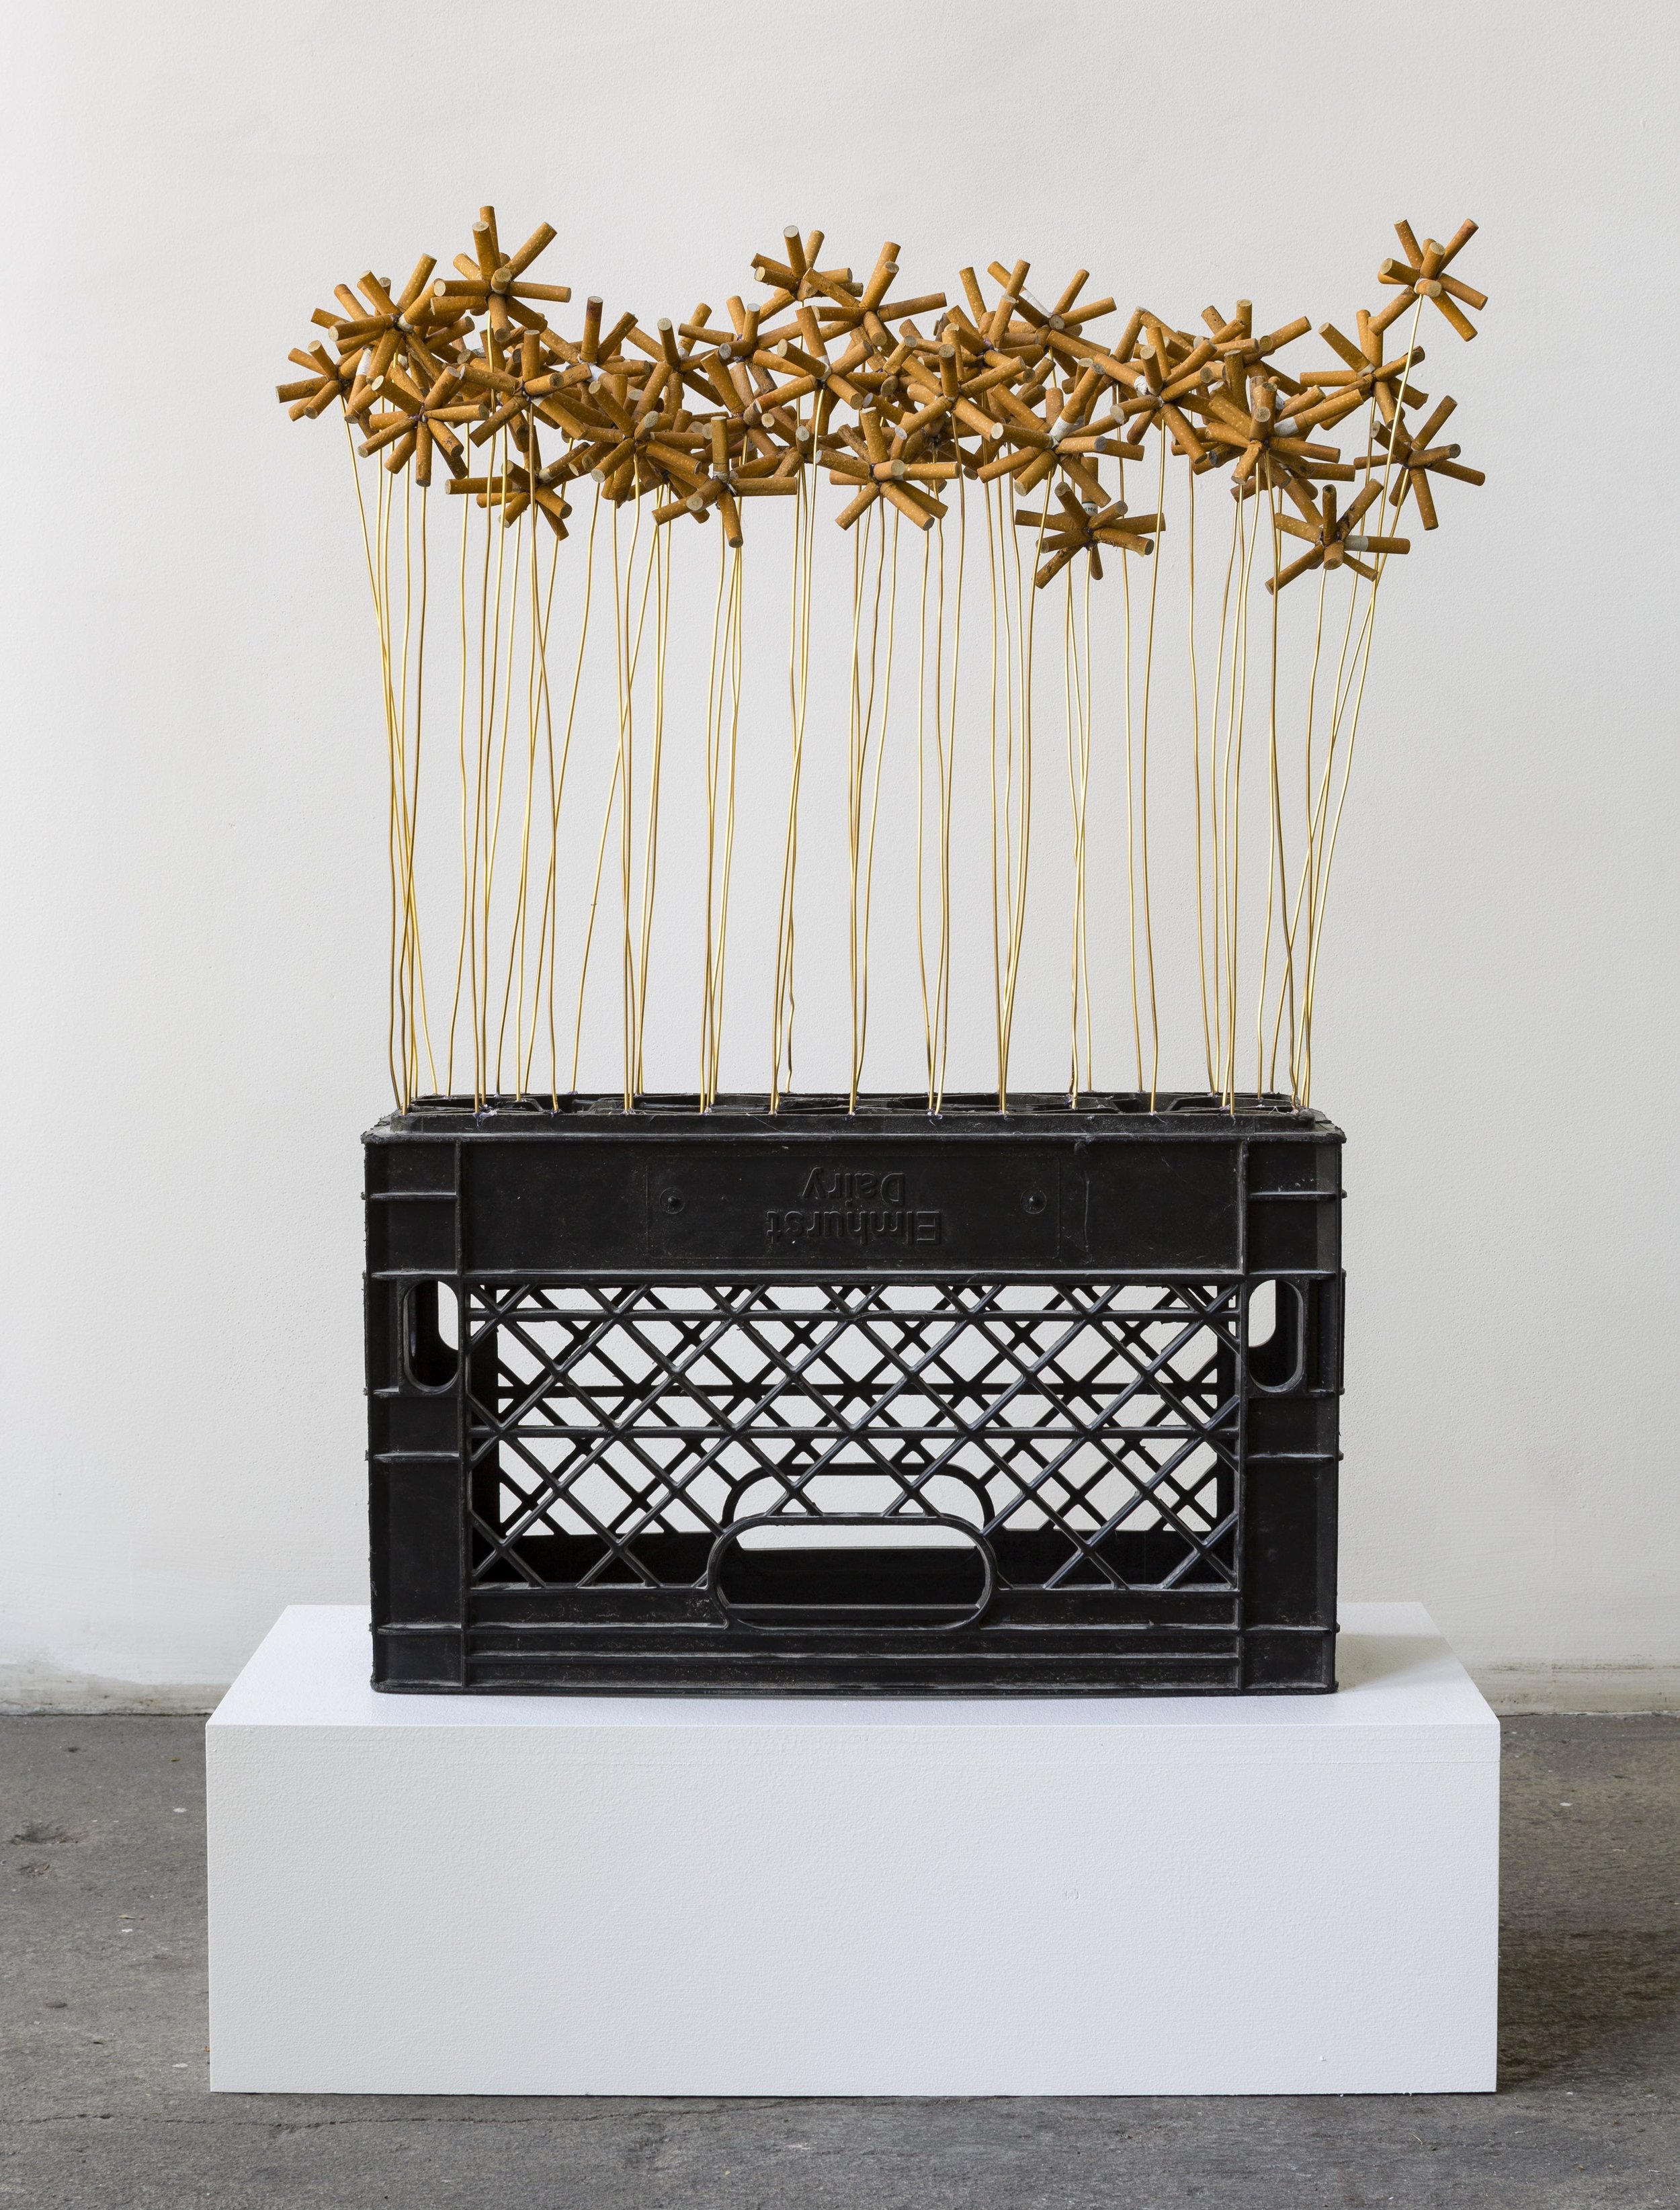 Rodriguez, Shellyne, Orthography of the Wake, 2018, Assemblage, Cigarette butts, bronze wire, crate, 29 x 19 x 7 inches (37 x 24 x 13 inches with crate).jpg